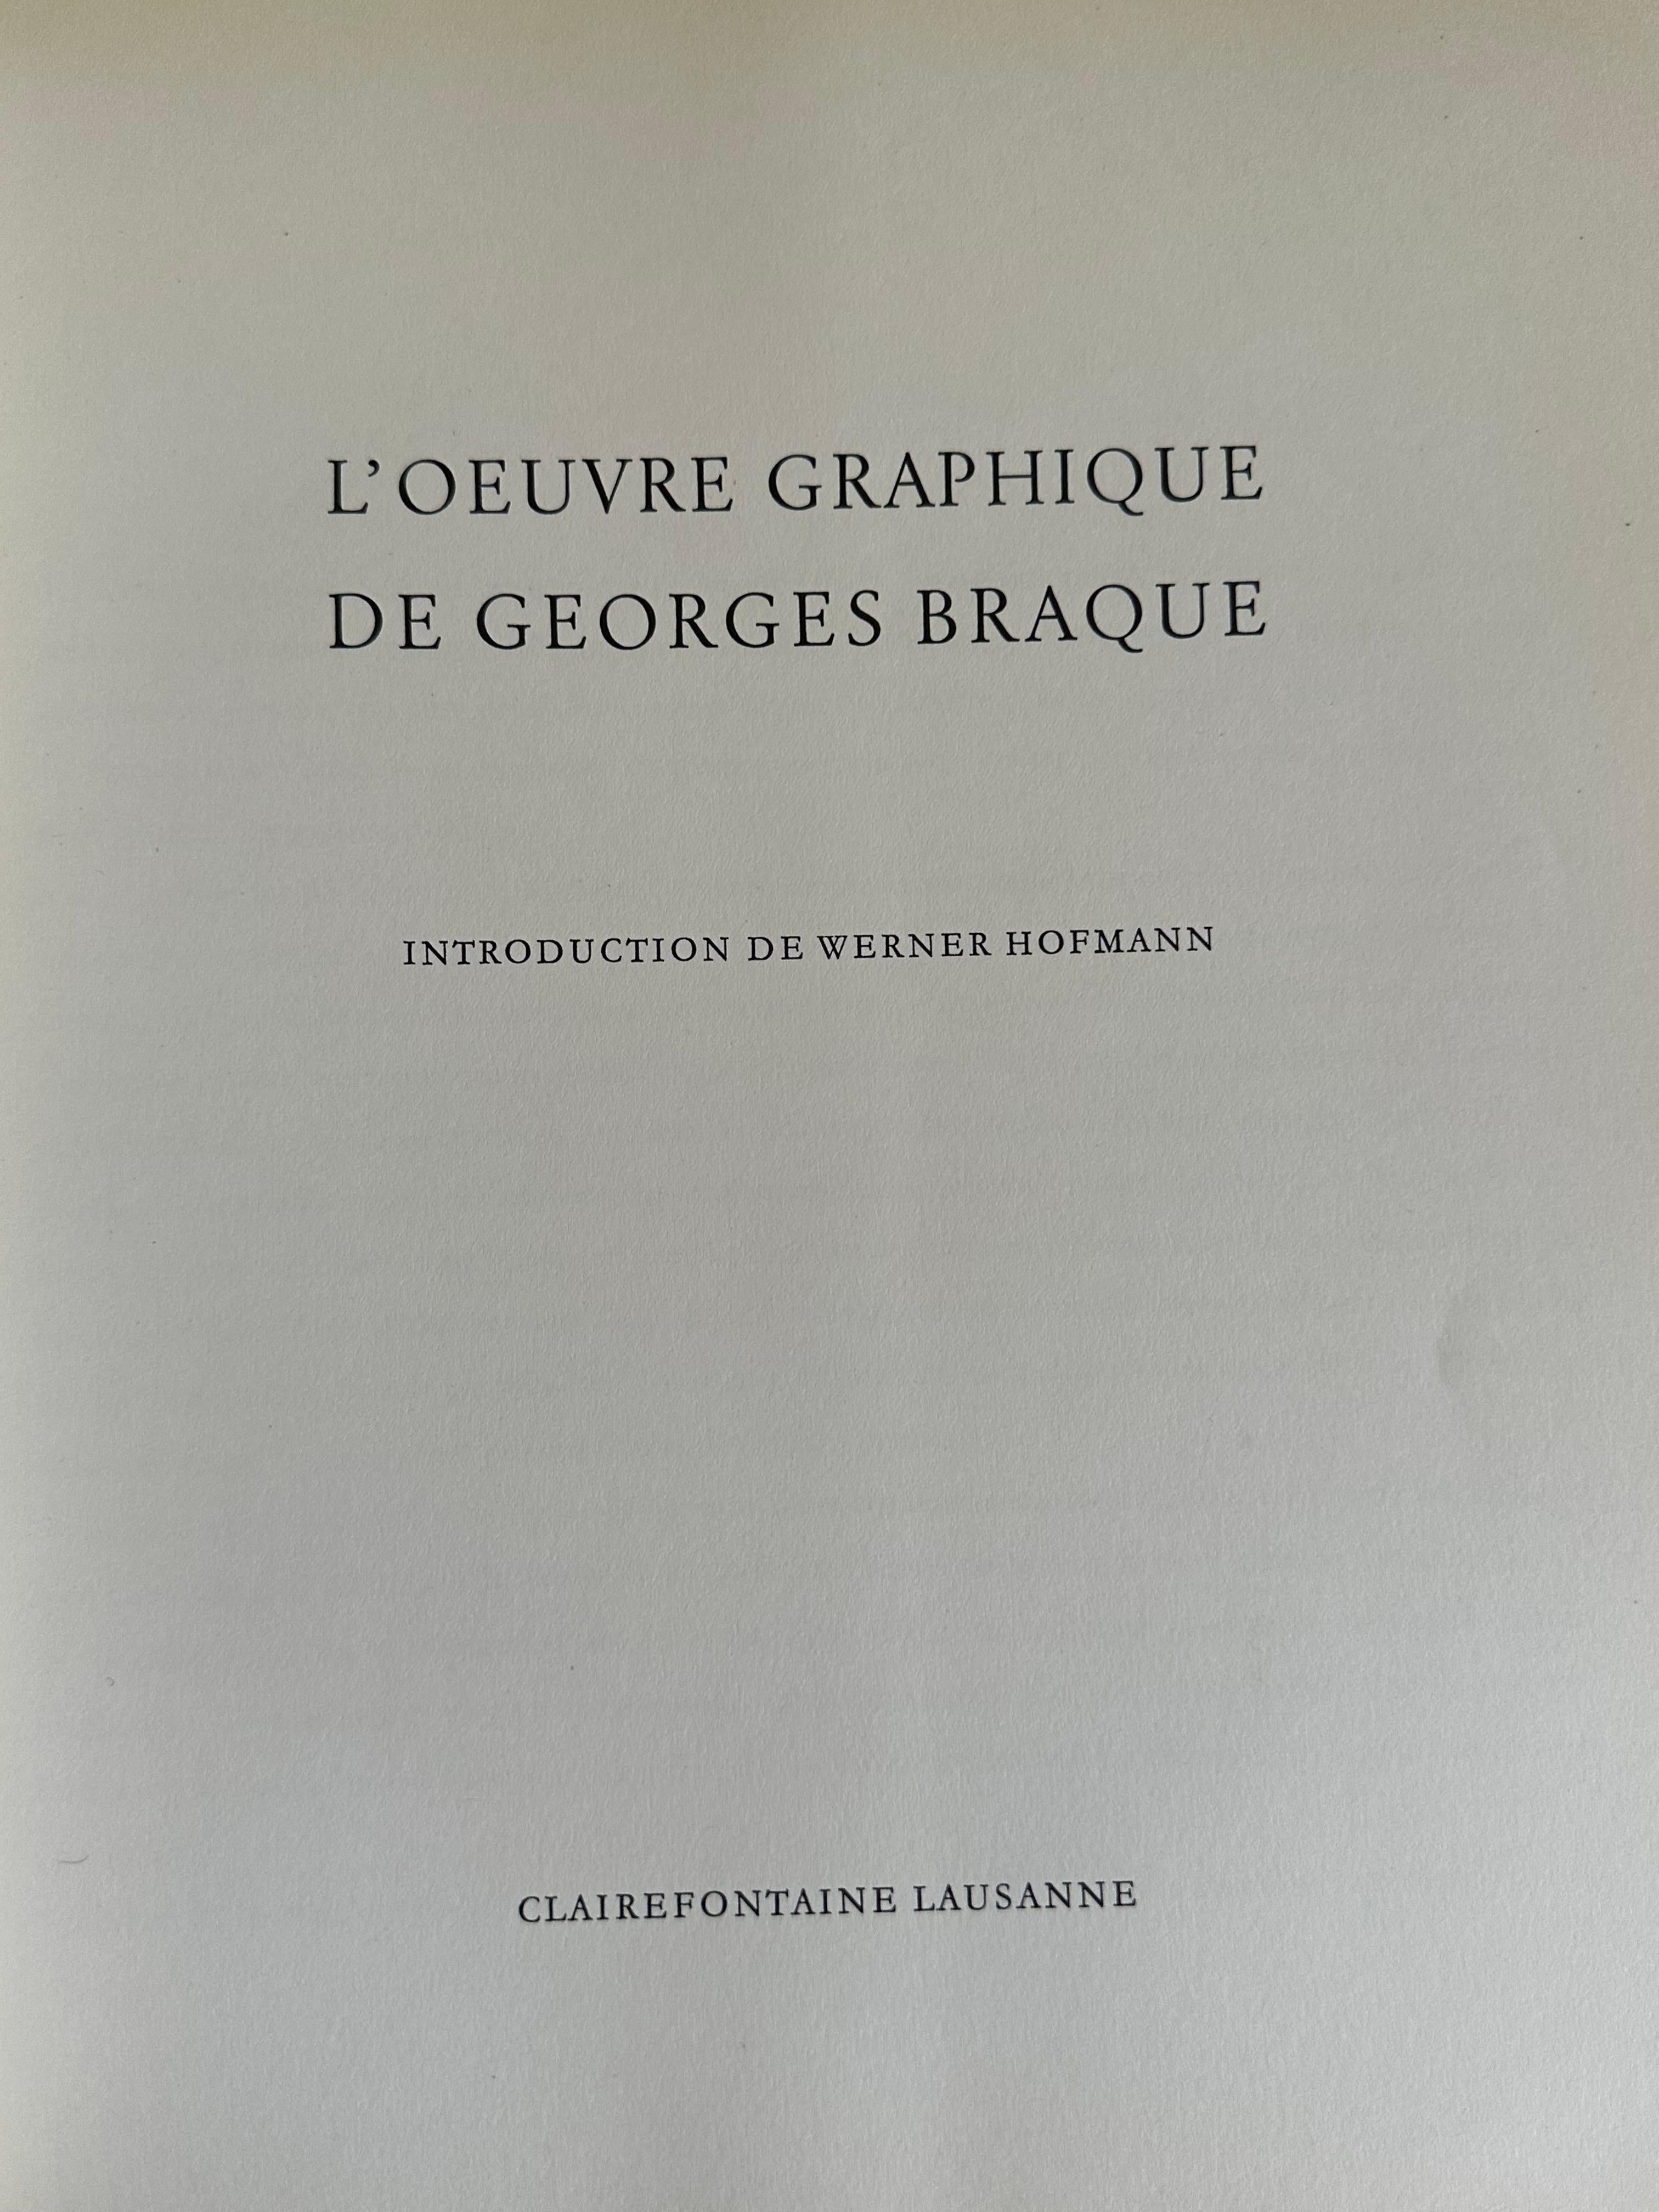 Paper “The Graphic Works of Georges Braque” French Art Book For Sale